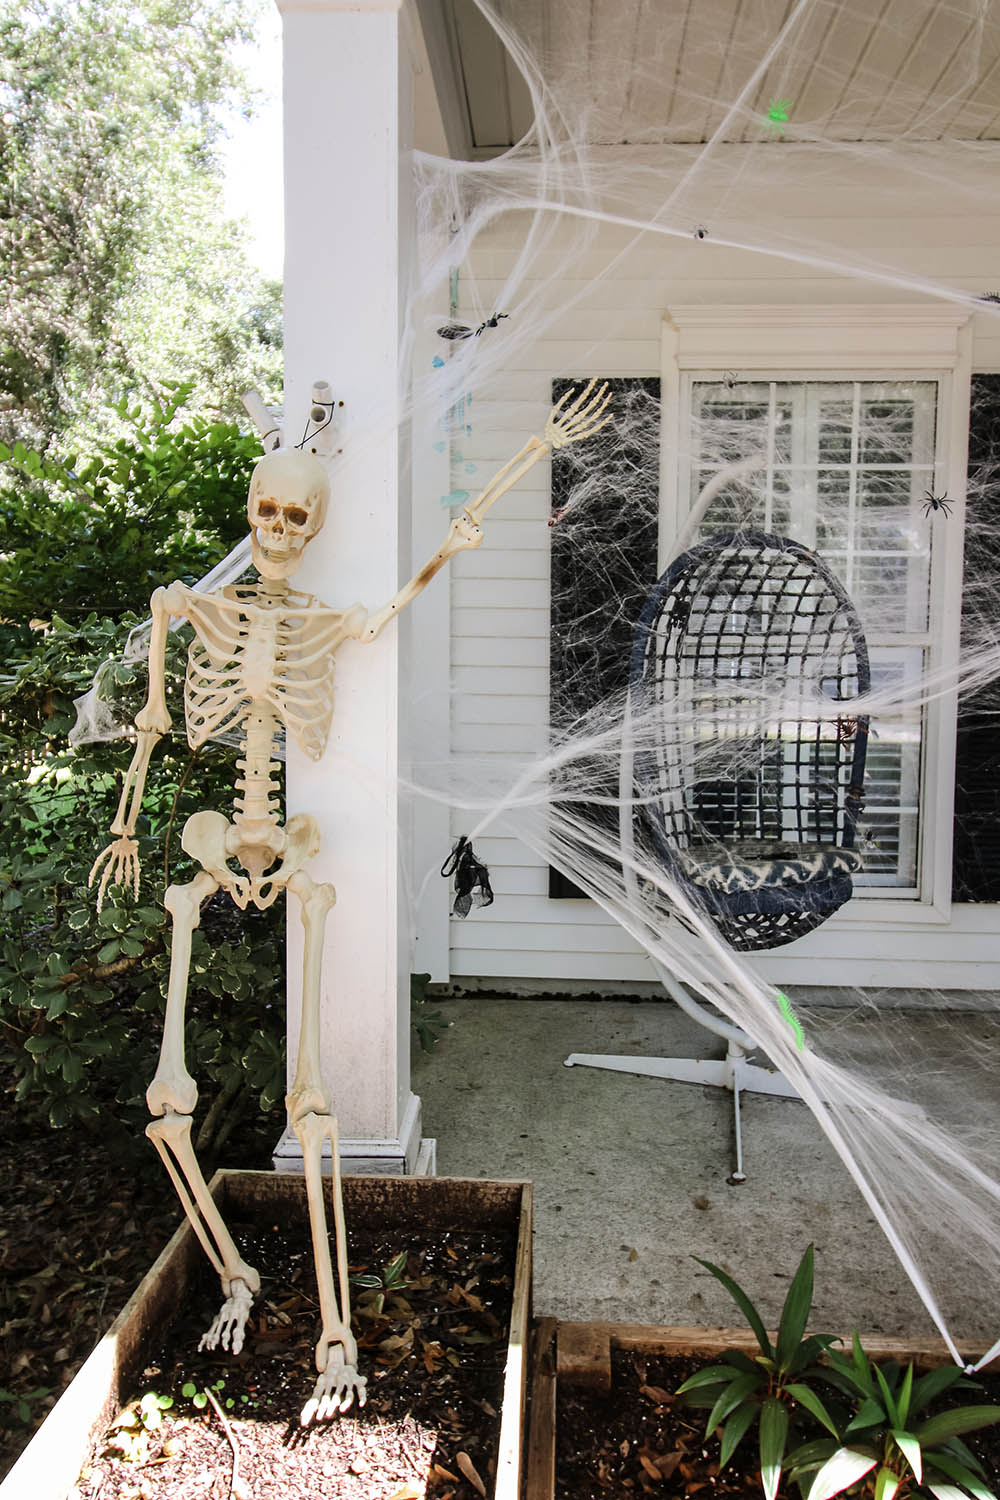 A skeleton standing in a garden bed next to a porch of spider webs.